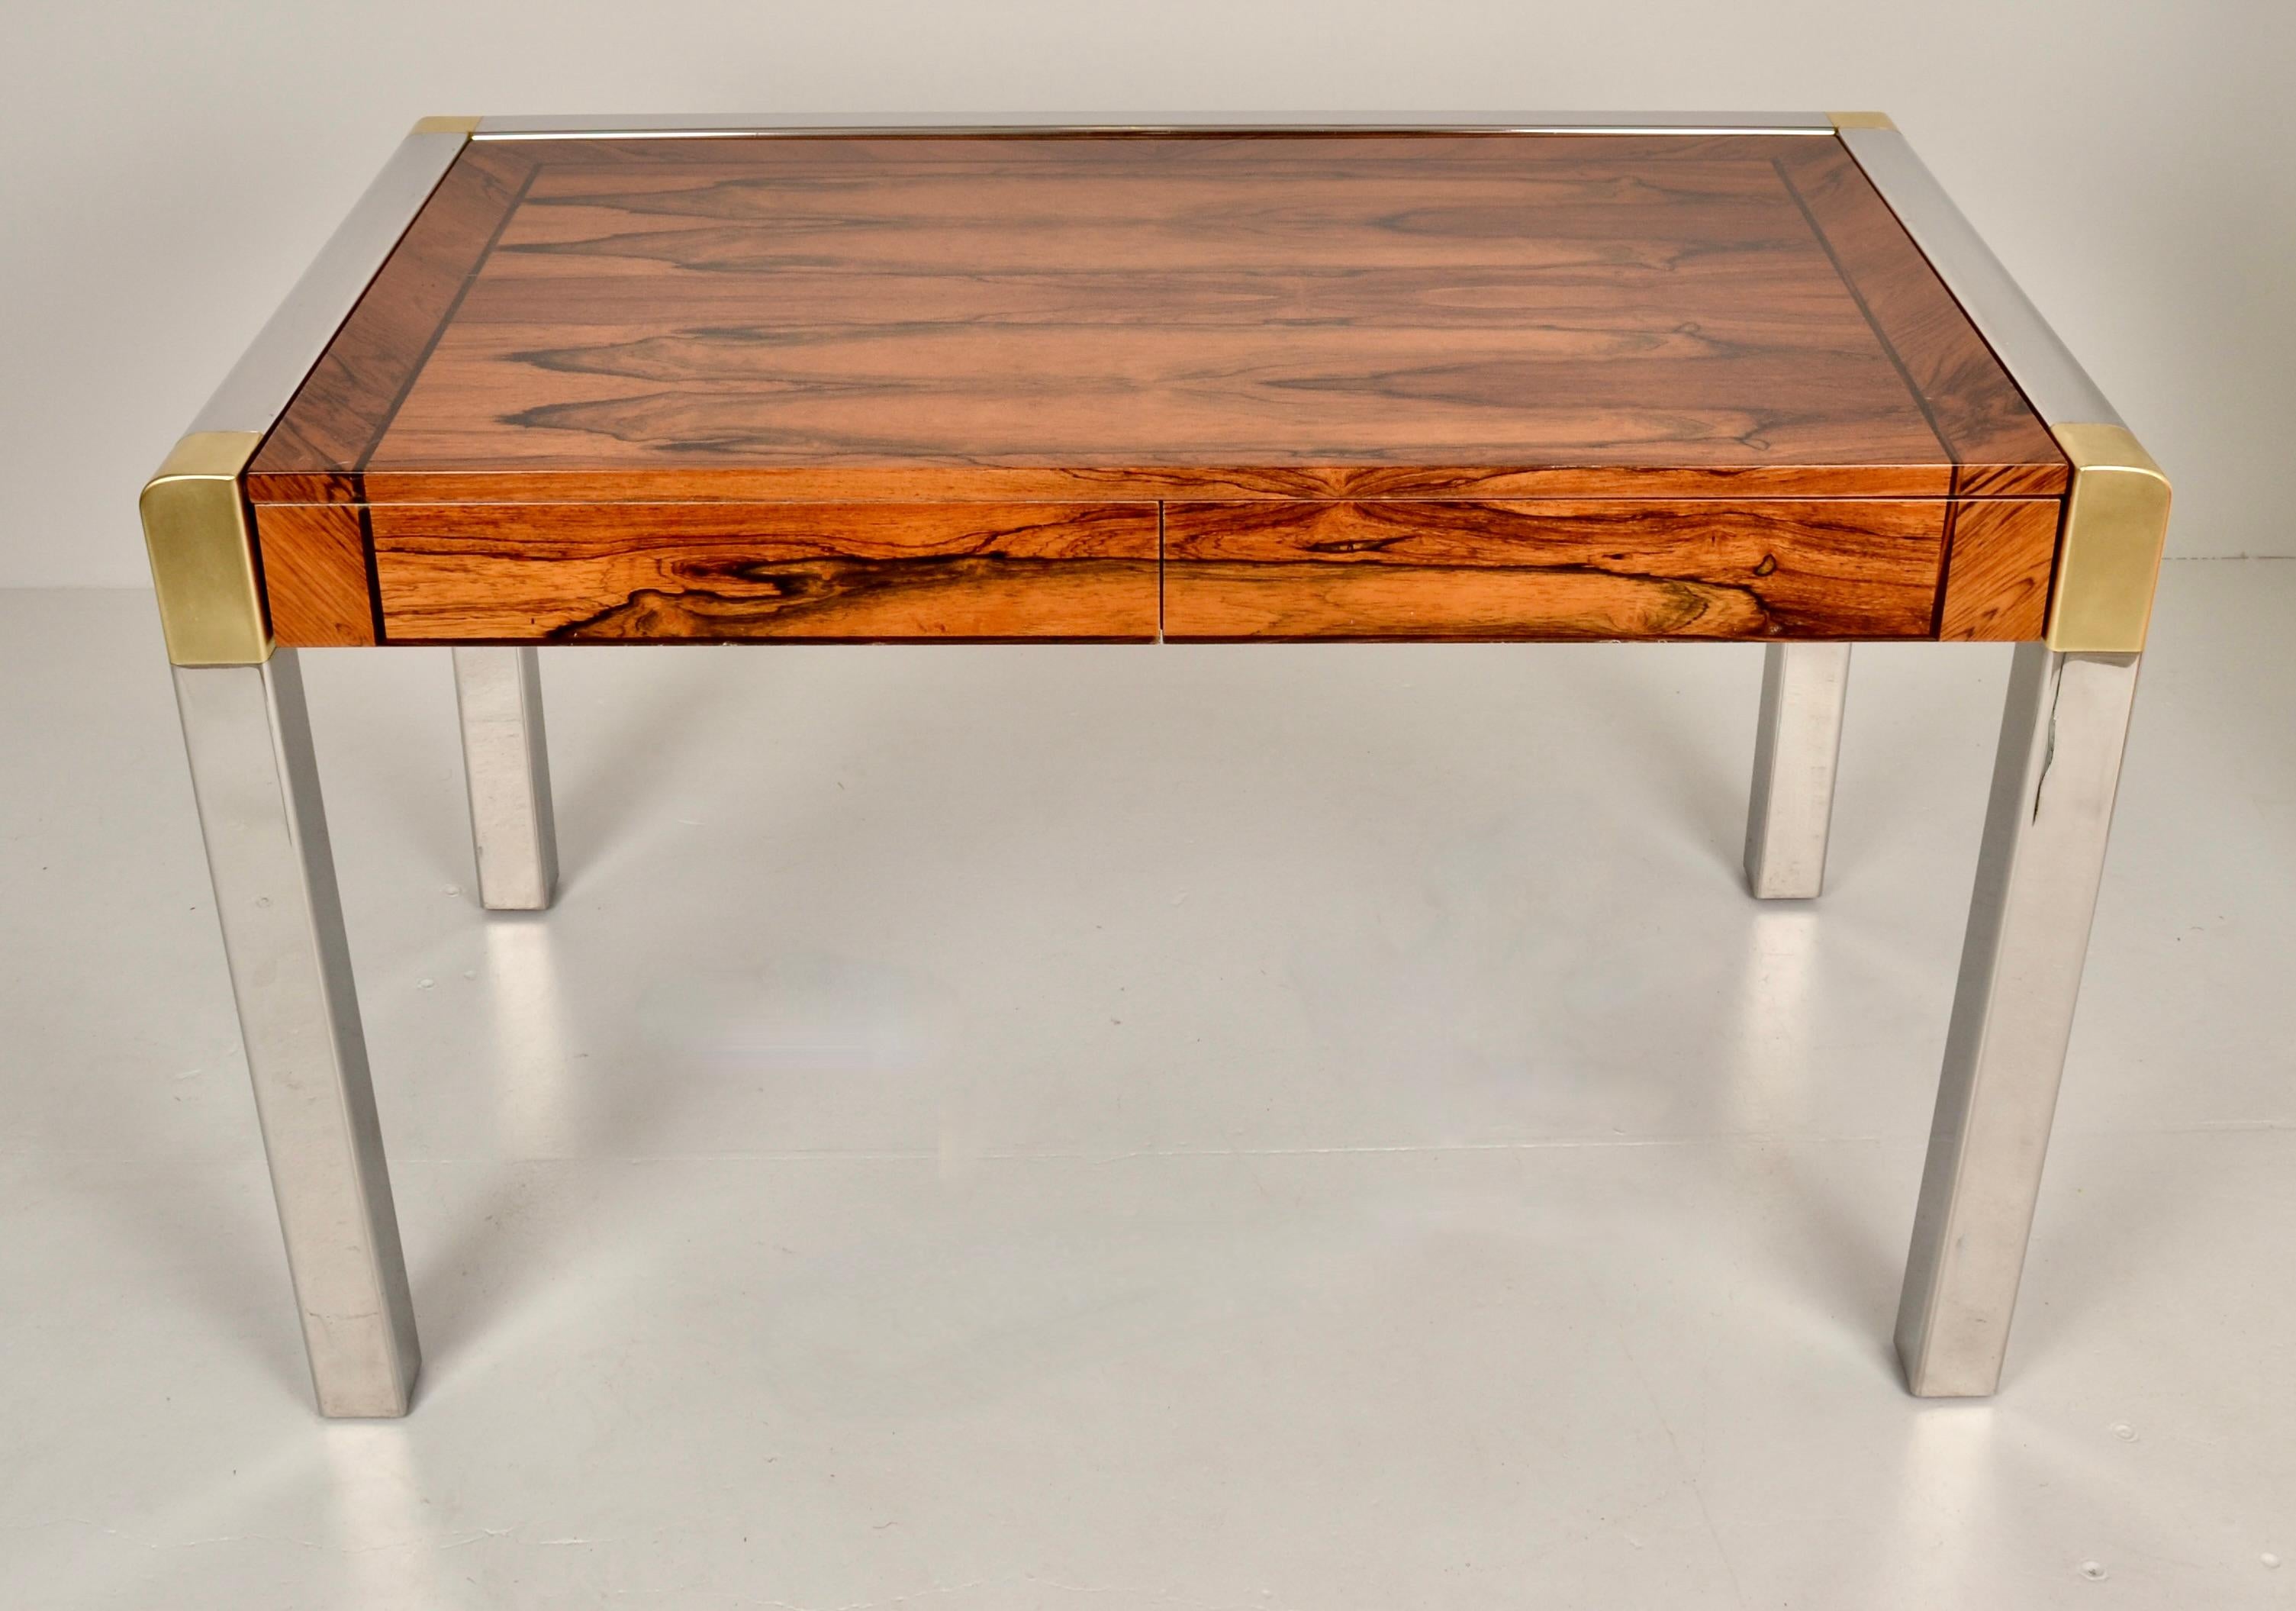 Karl Springer, rose to world acclaim in the 1970s. He created custom furniture sought by the glitterati, famously utilizing exotic and unusual materials, and superior craftsmanship. 

This desk features a high gloss lacquered zebra wood top with two